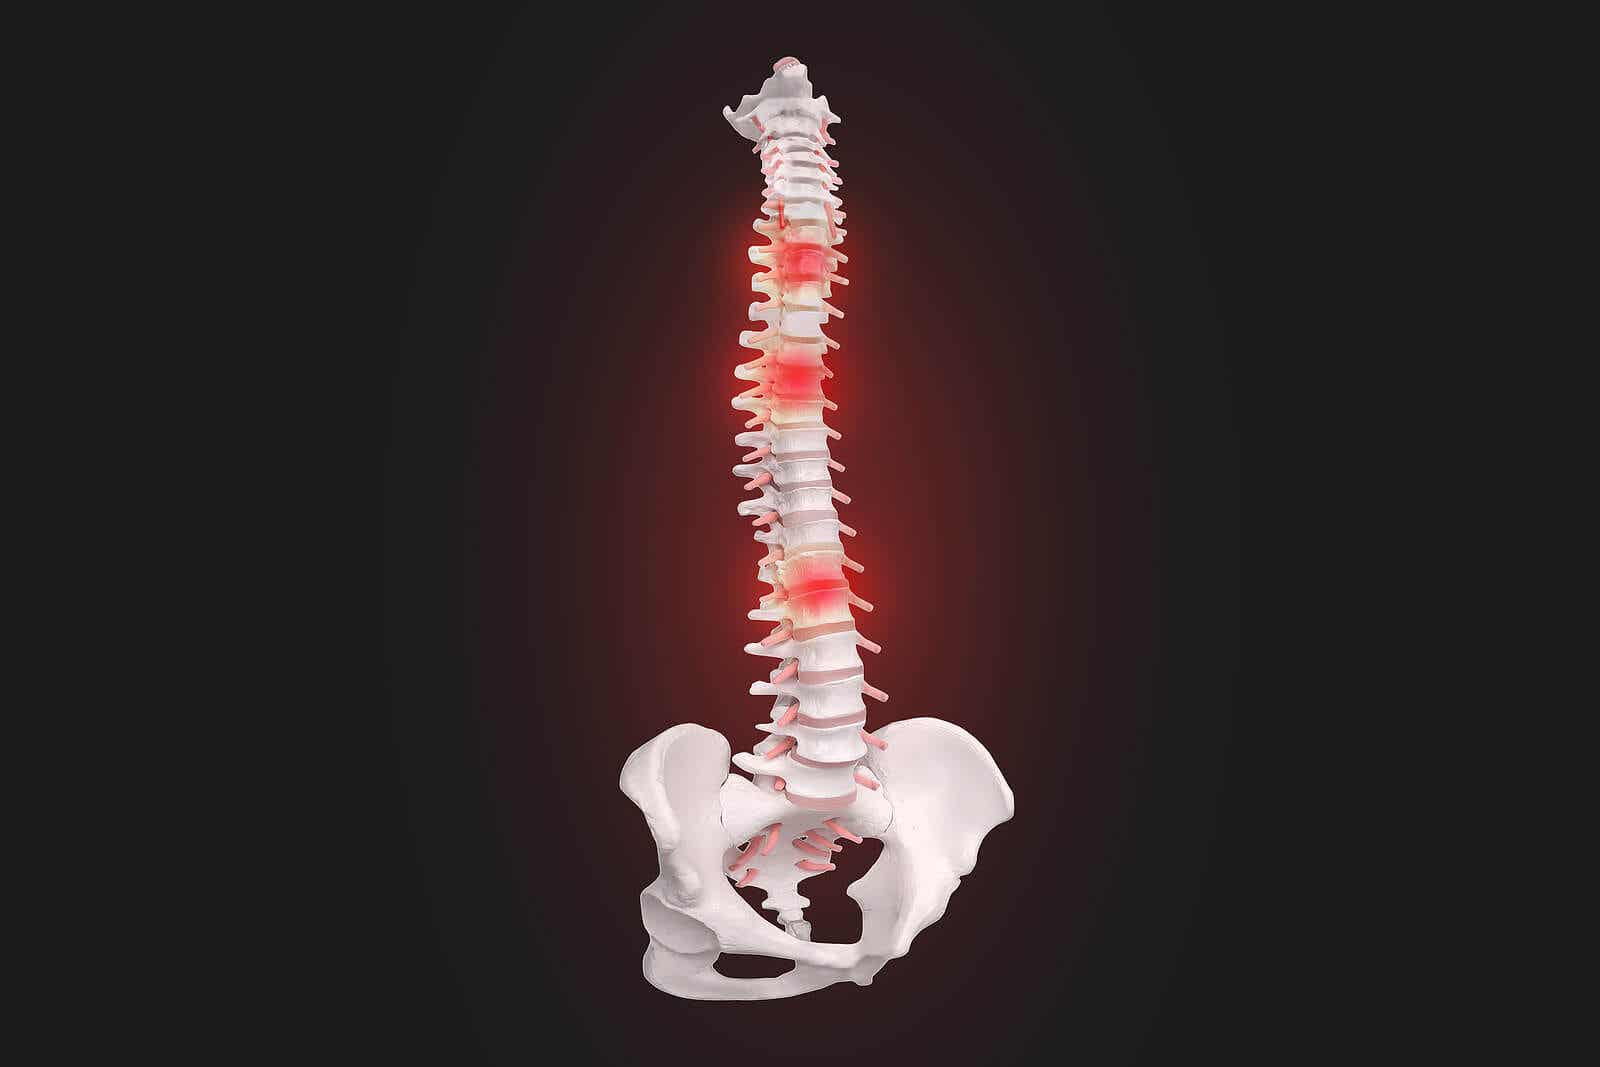 scoliotic posture and spinal chord